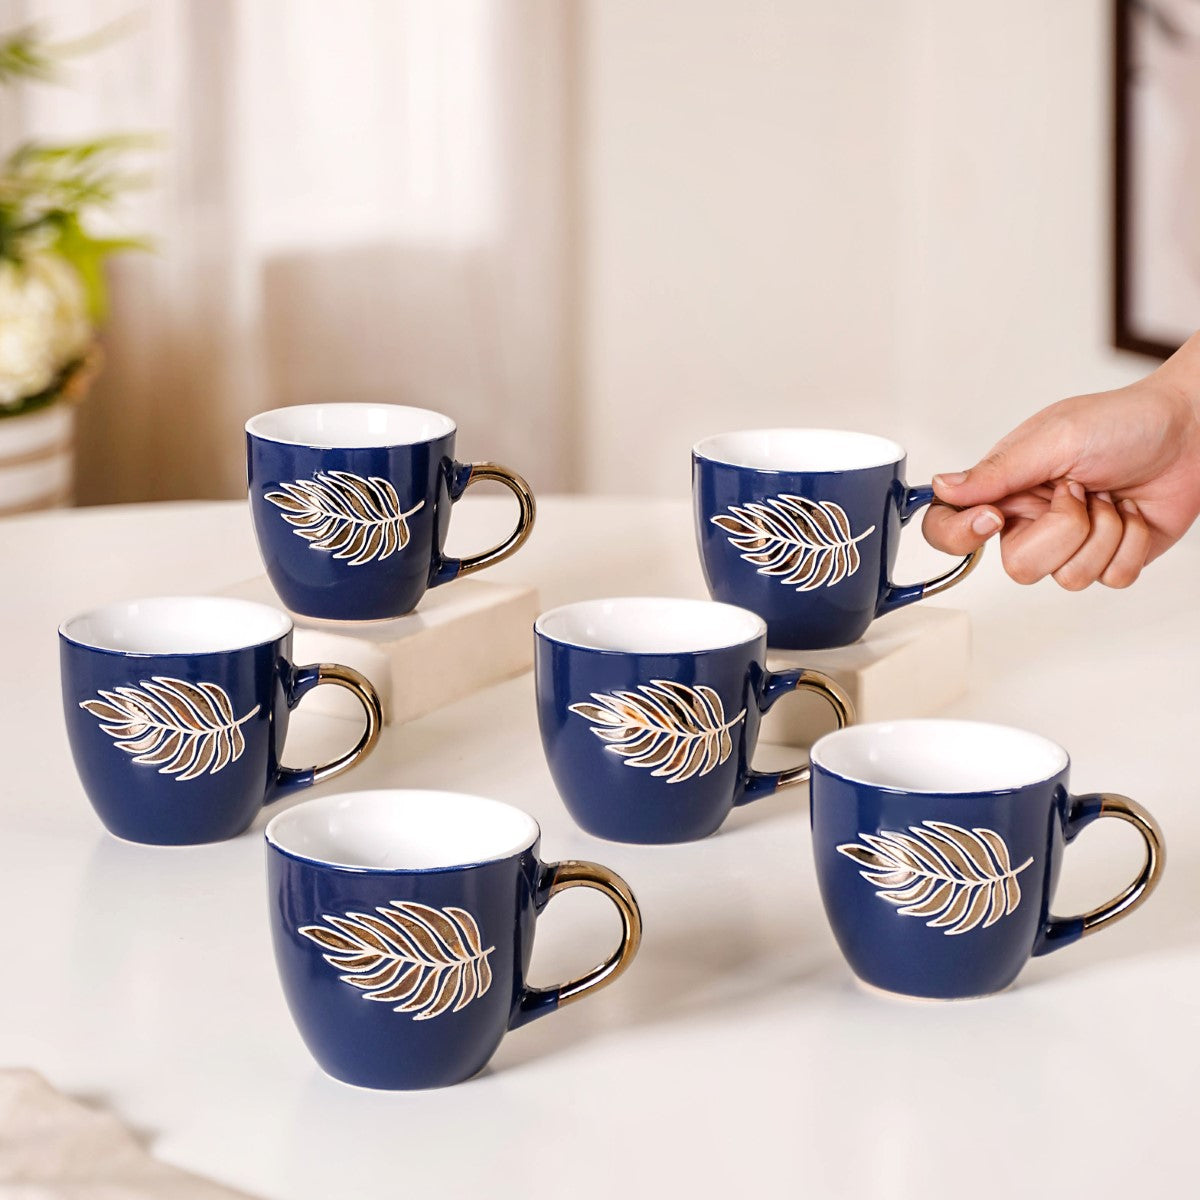 We Are Happy To Serve You Ceramic Mugs Coffee Cups 100ml/280ml